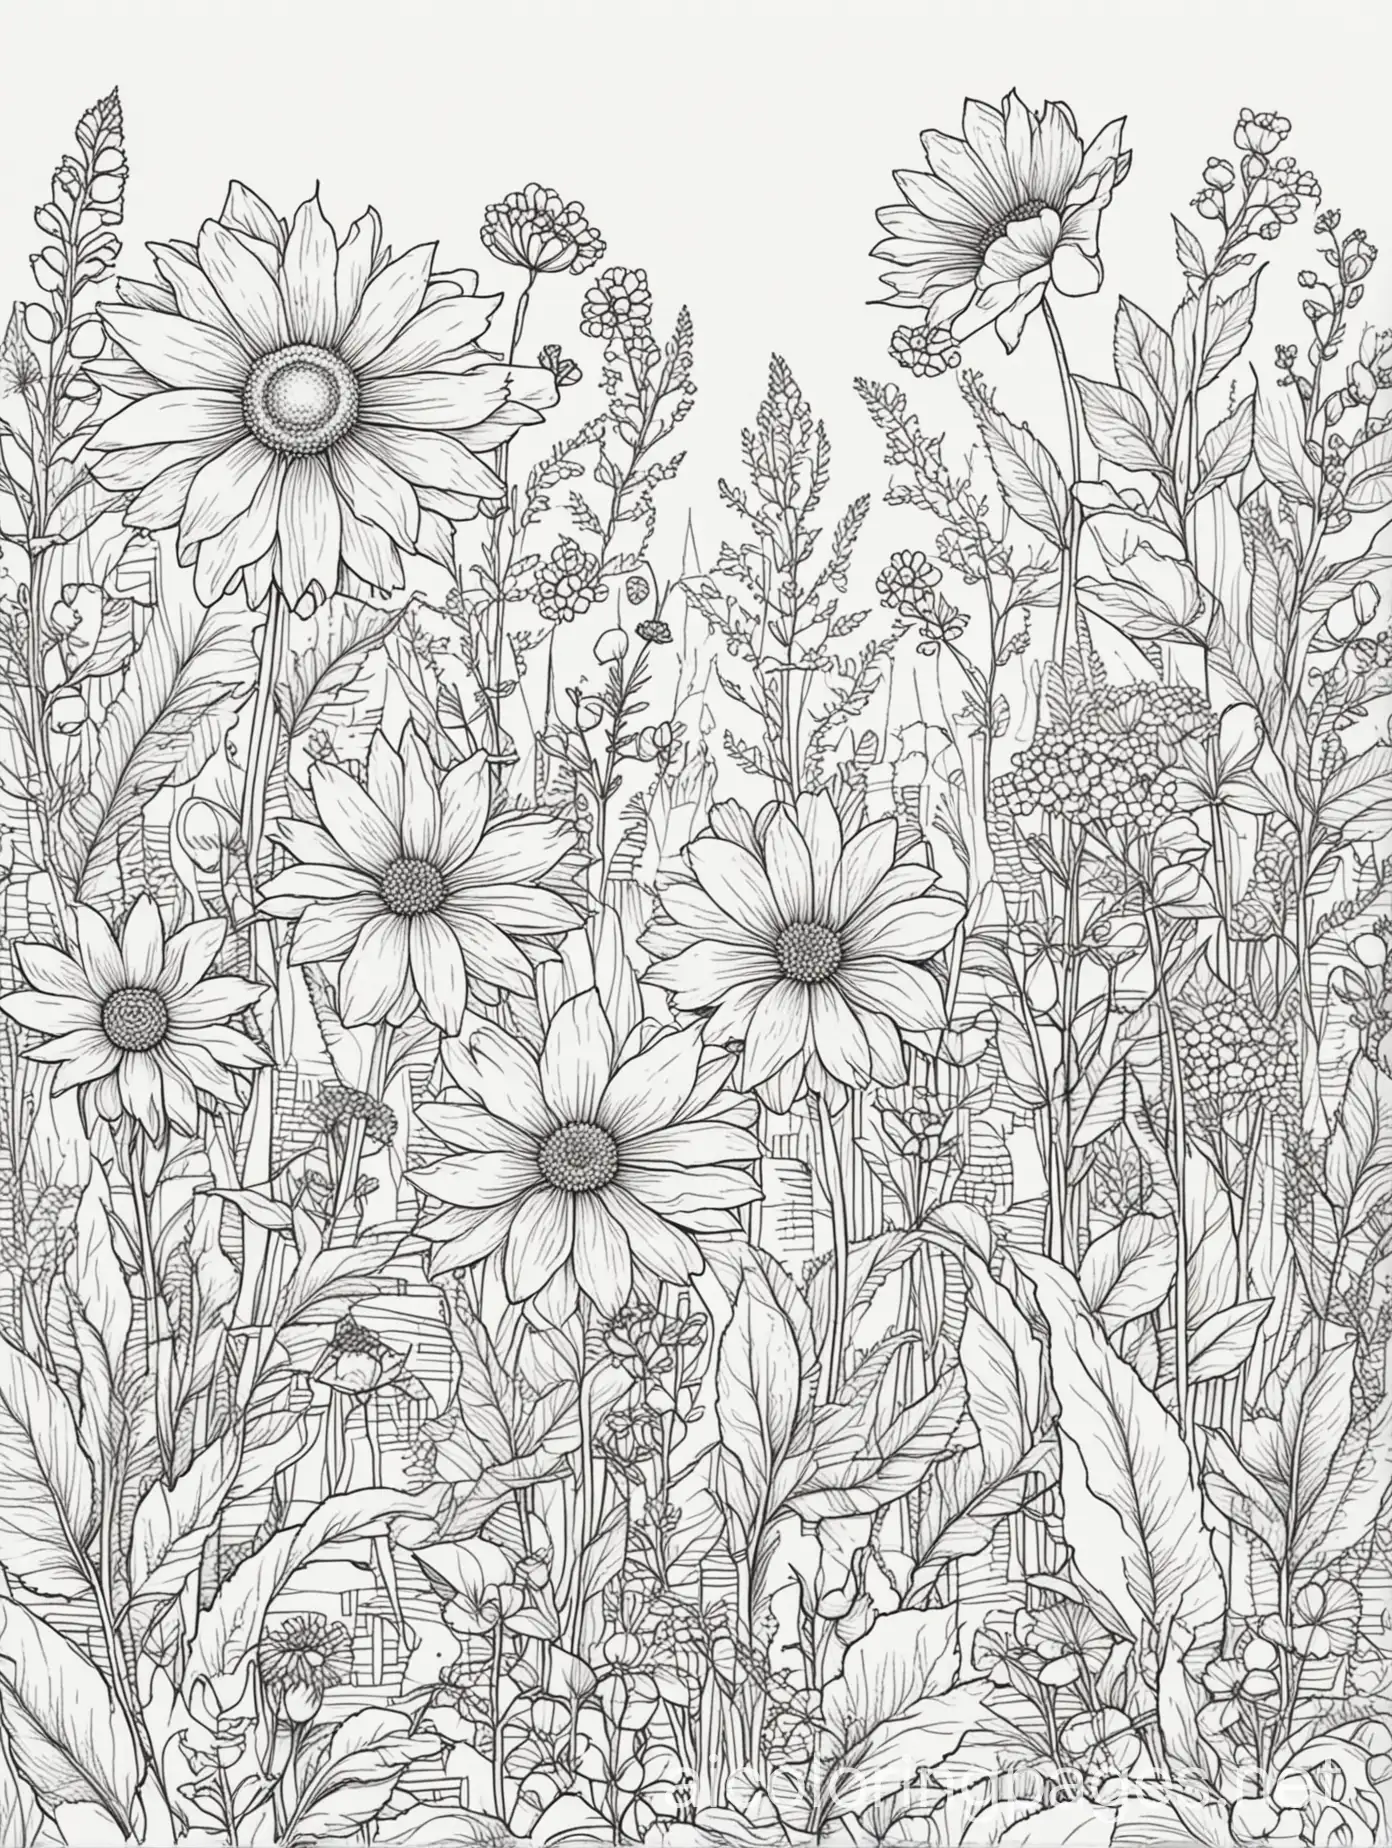 Adorable-Wildflowers-Coloring-Page-for-Kids